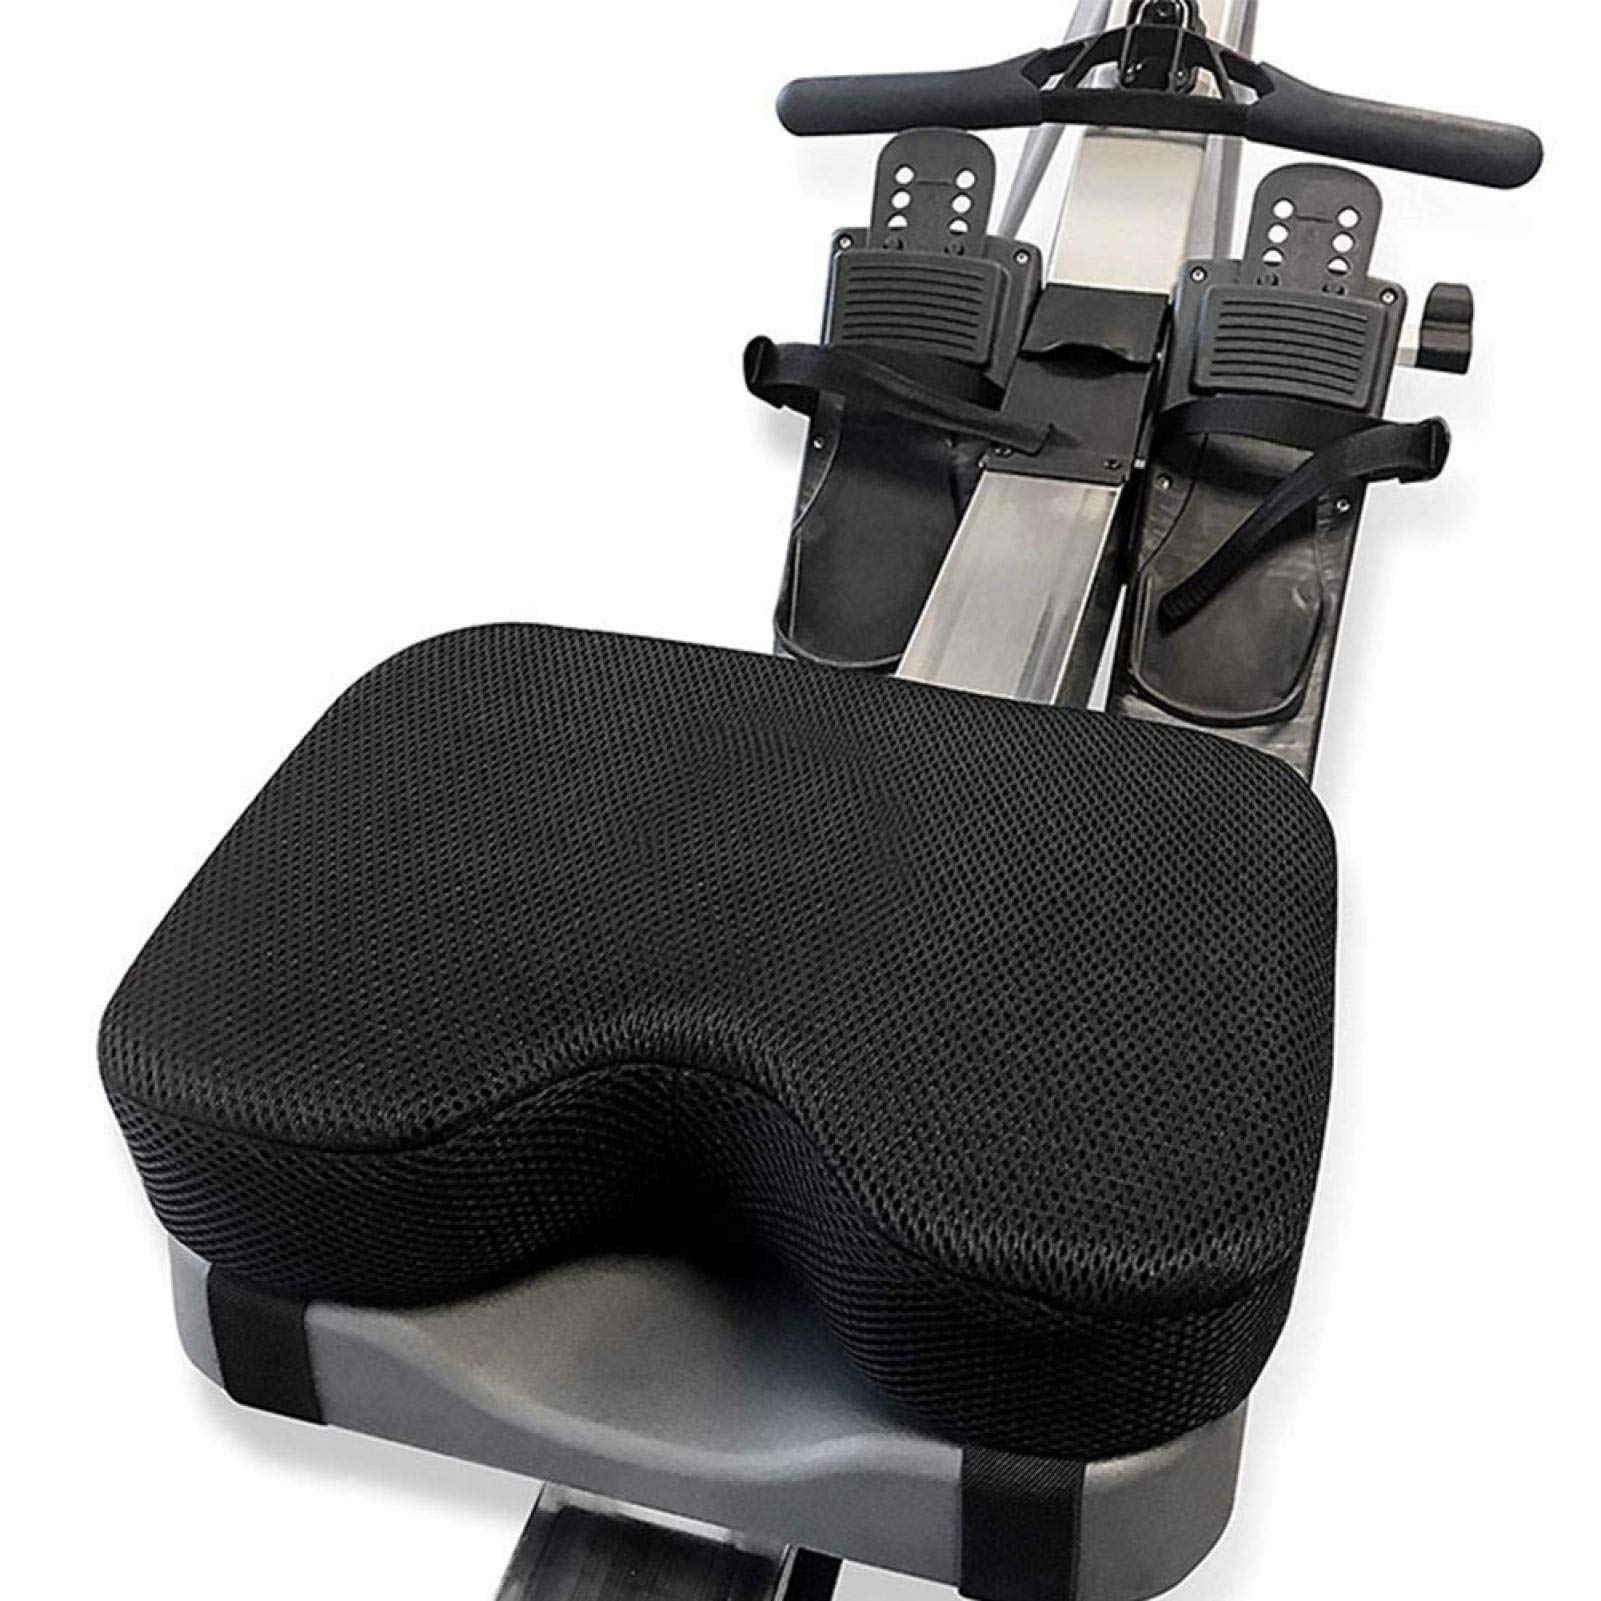 Rowing Machine Seat Cushion for Concept 2 Rowing Machine